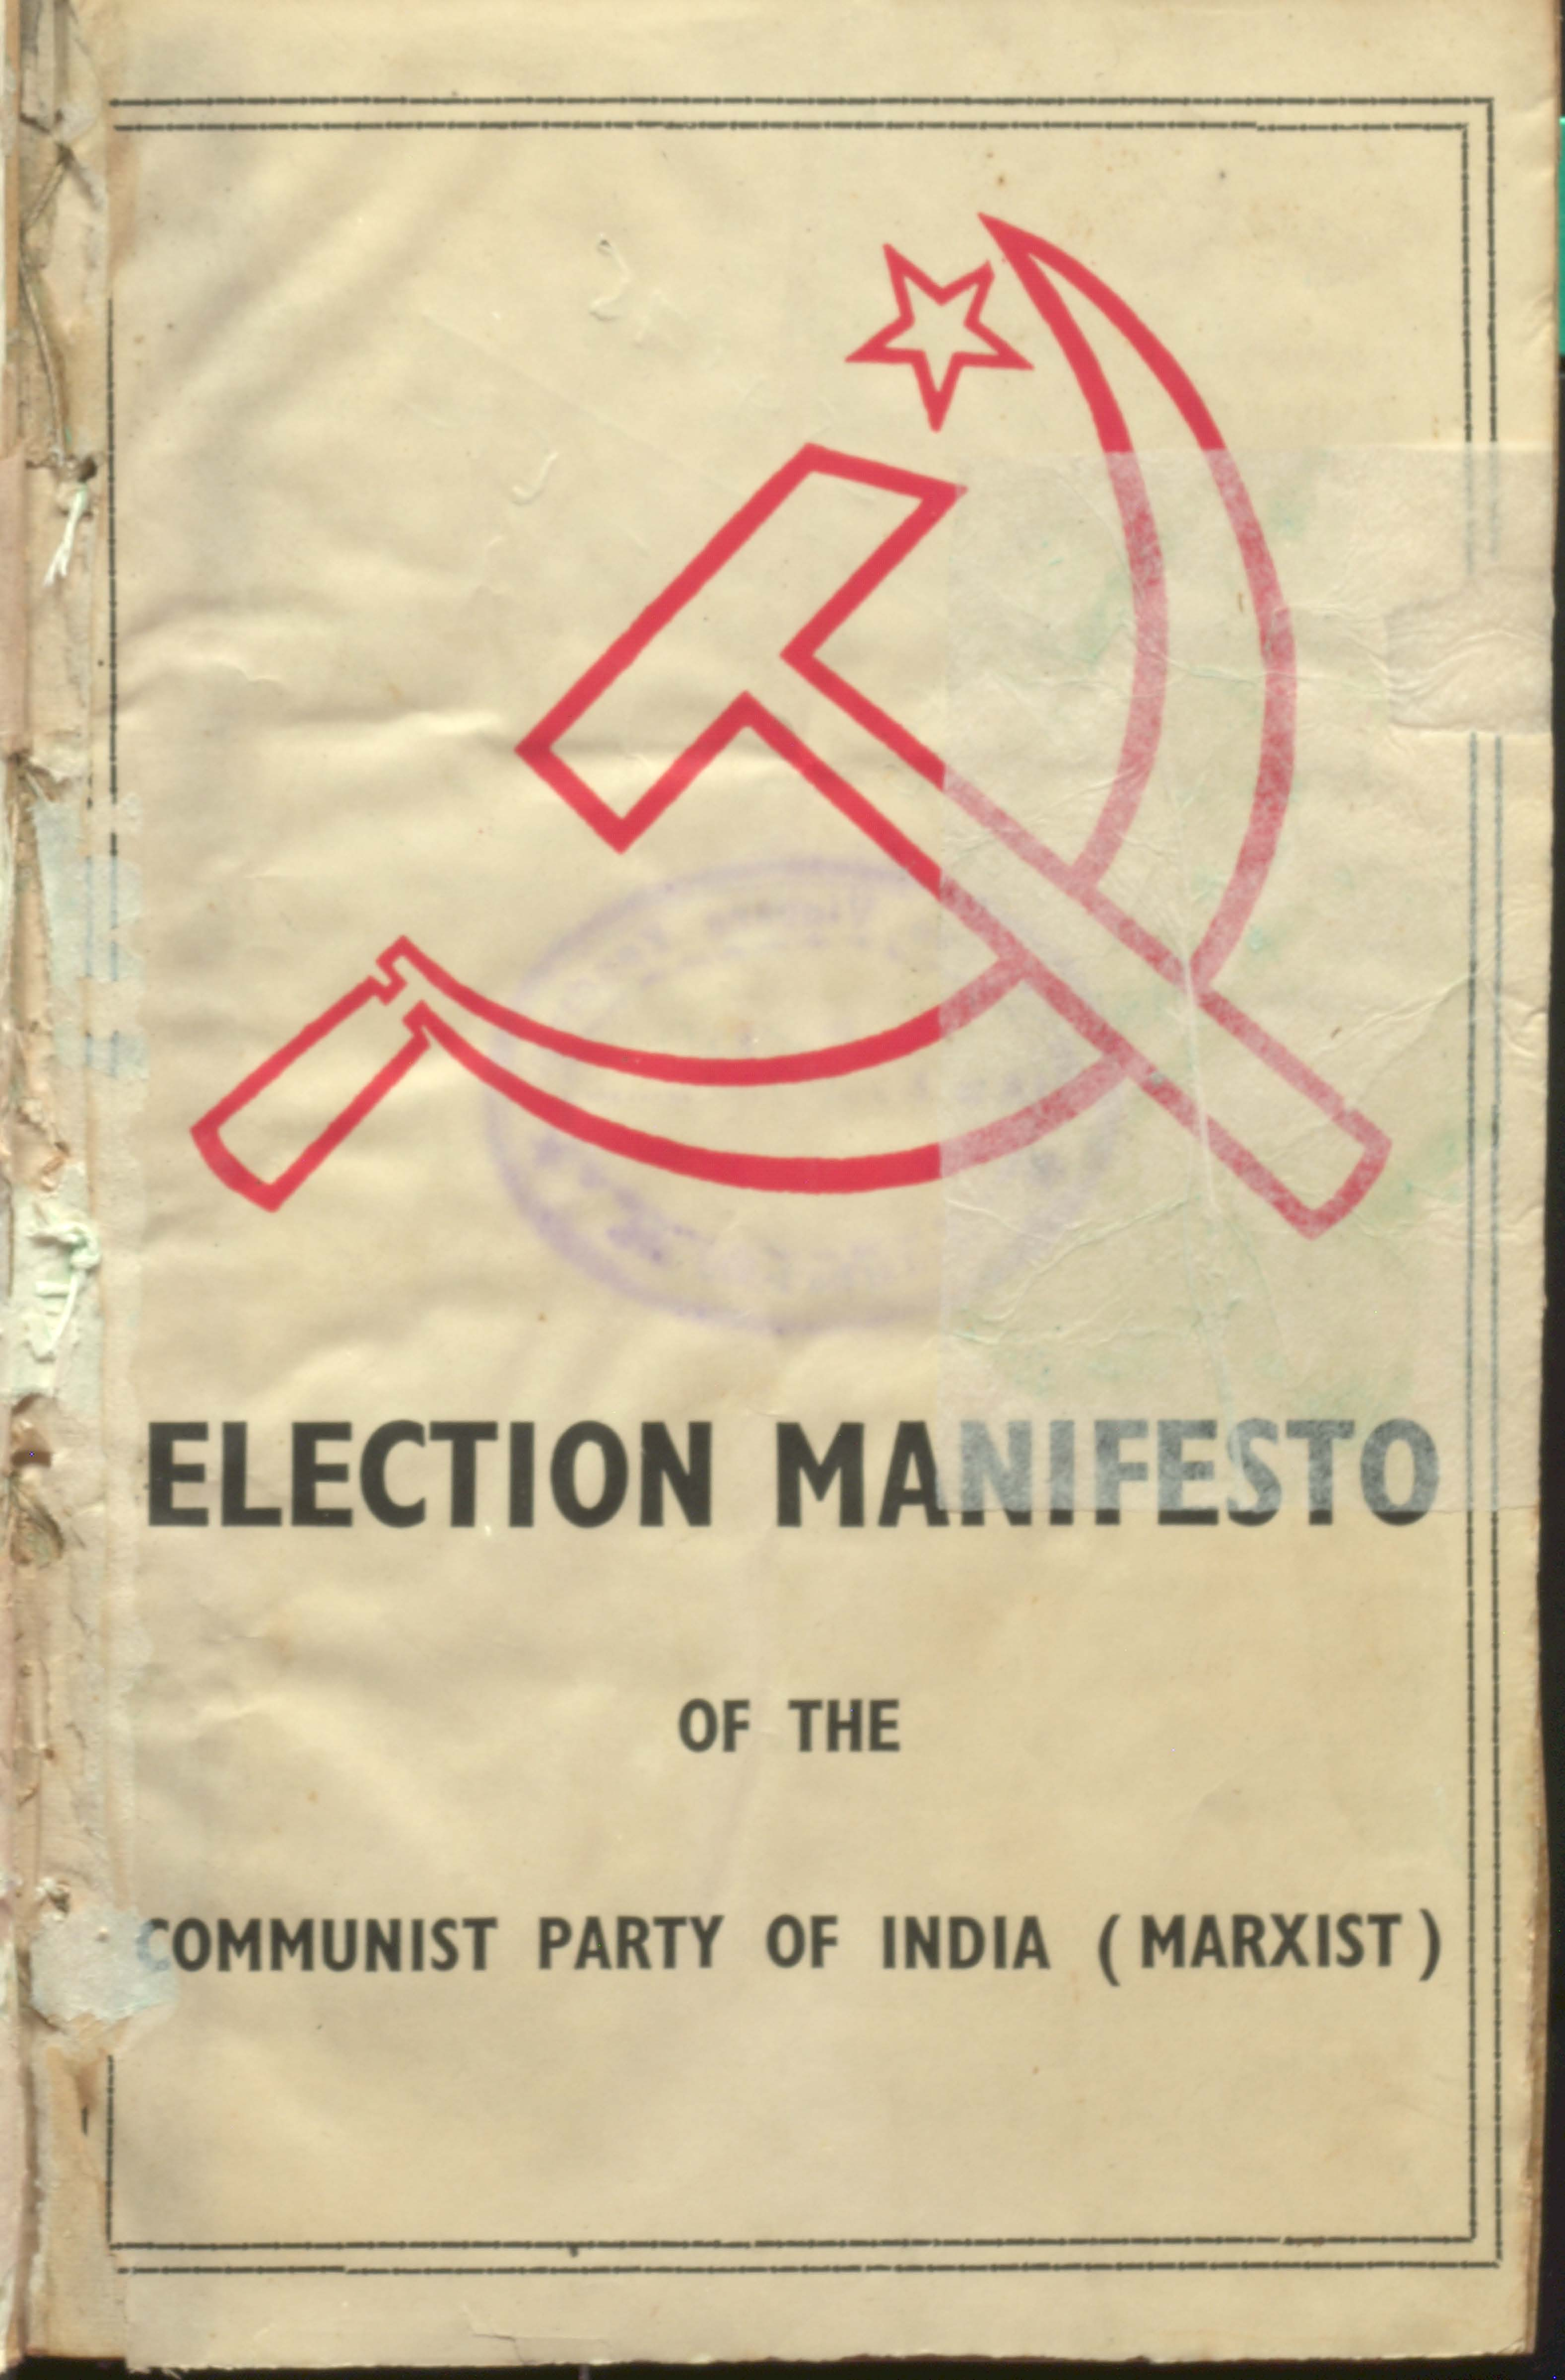 ELECTION MANIFES TO OF THE COMMUNIST PARTY OF INDIA (marxist)